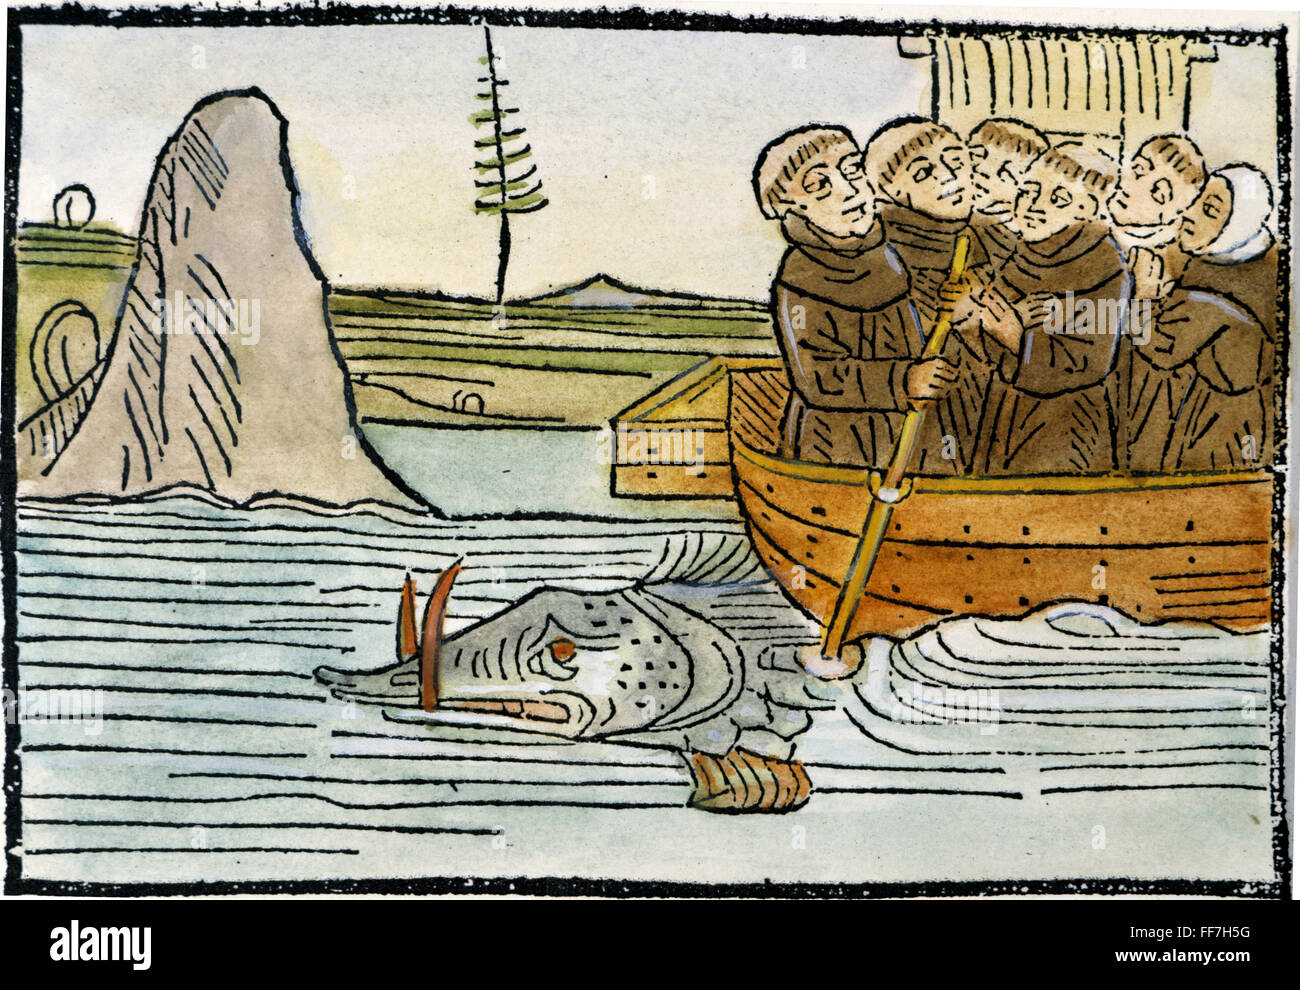 ST. BRENDAN (484-577). /nIrish monk and traveler. St. Brendan and his monks are attacked by a sea monster. Woodcut from a German version of 'Navigatio,' 1499. Stock Photo